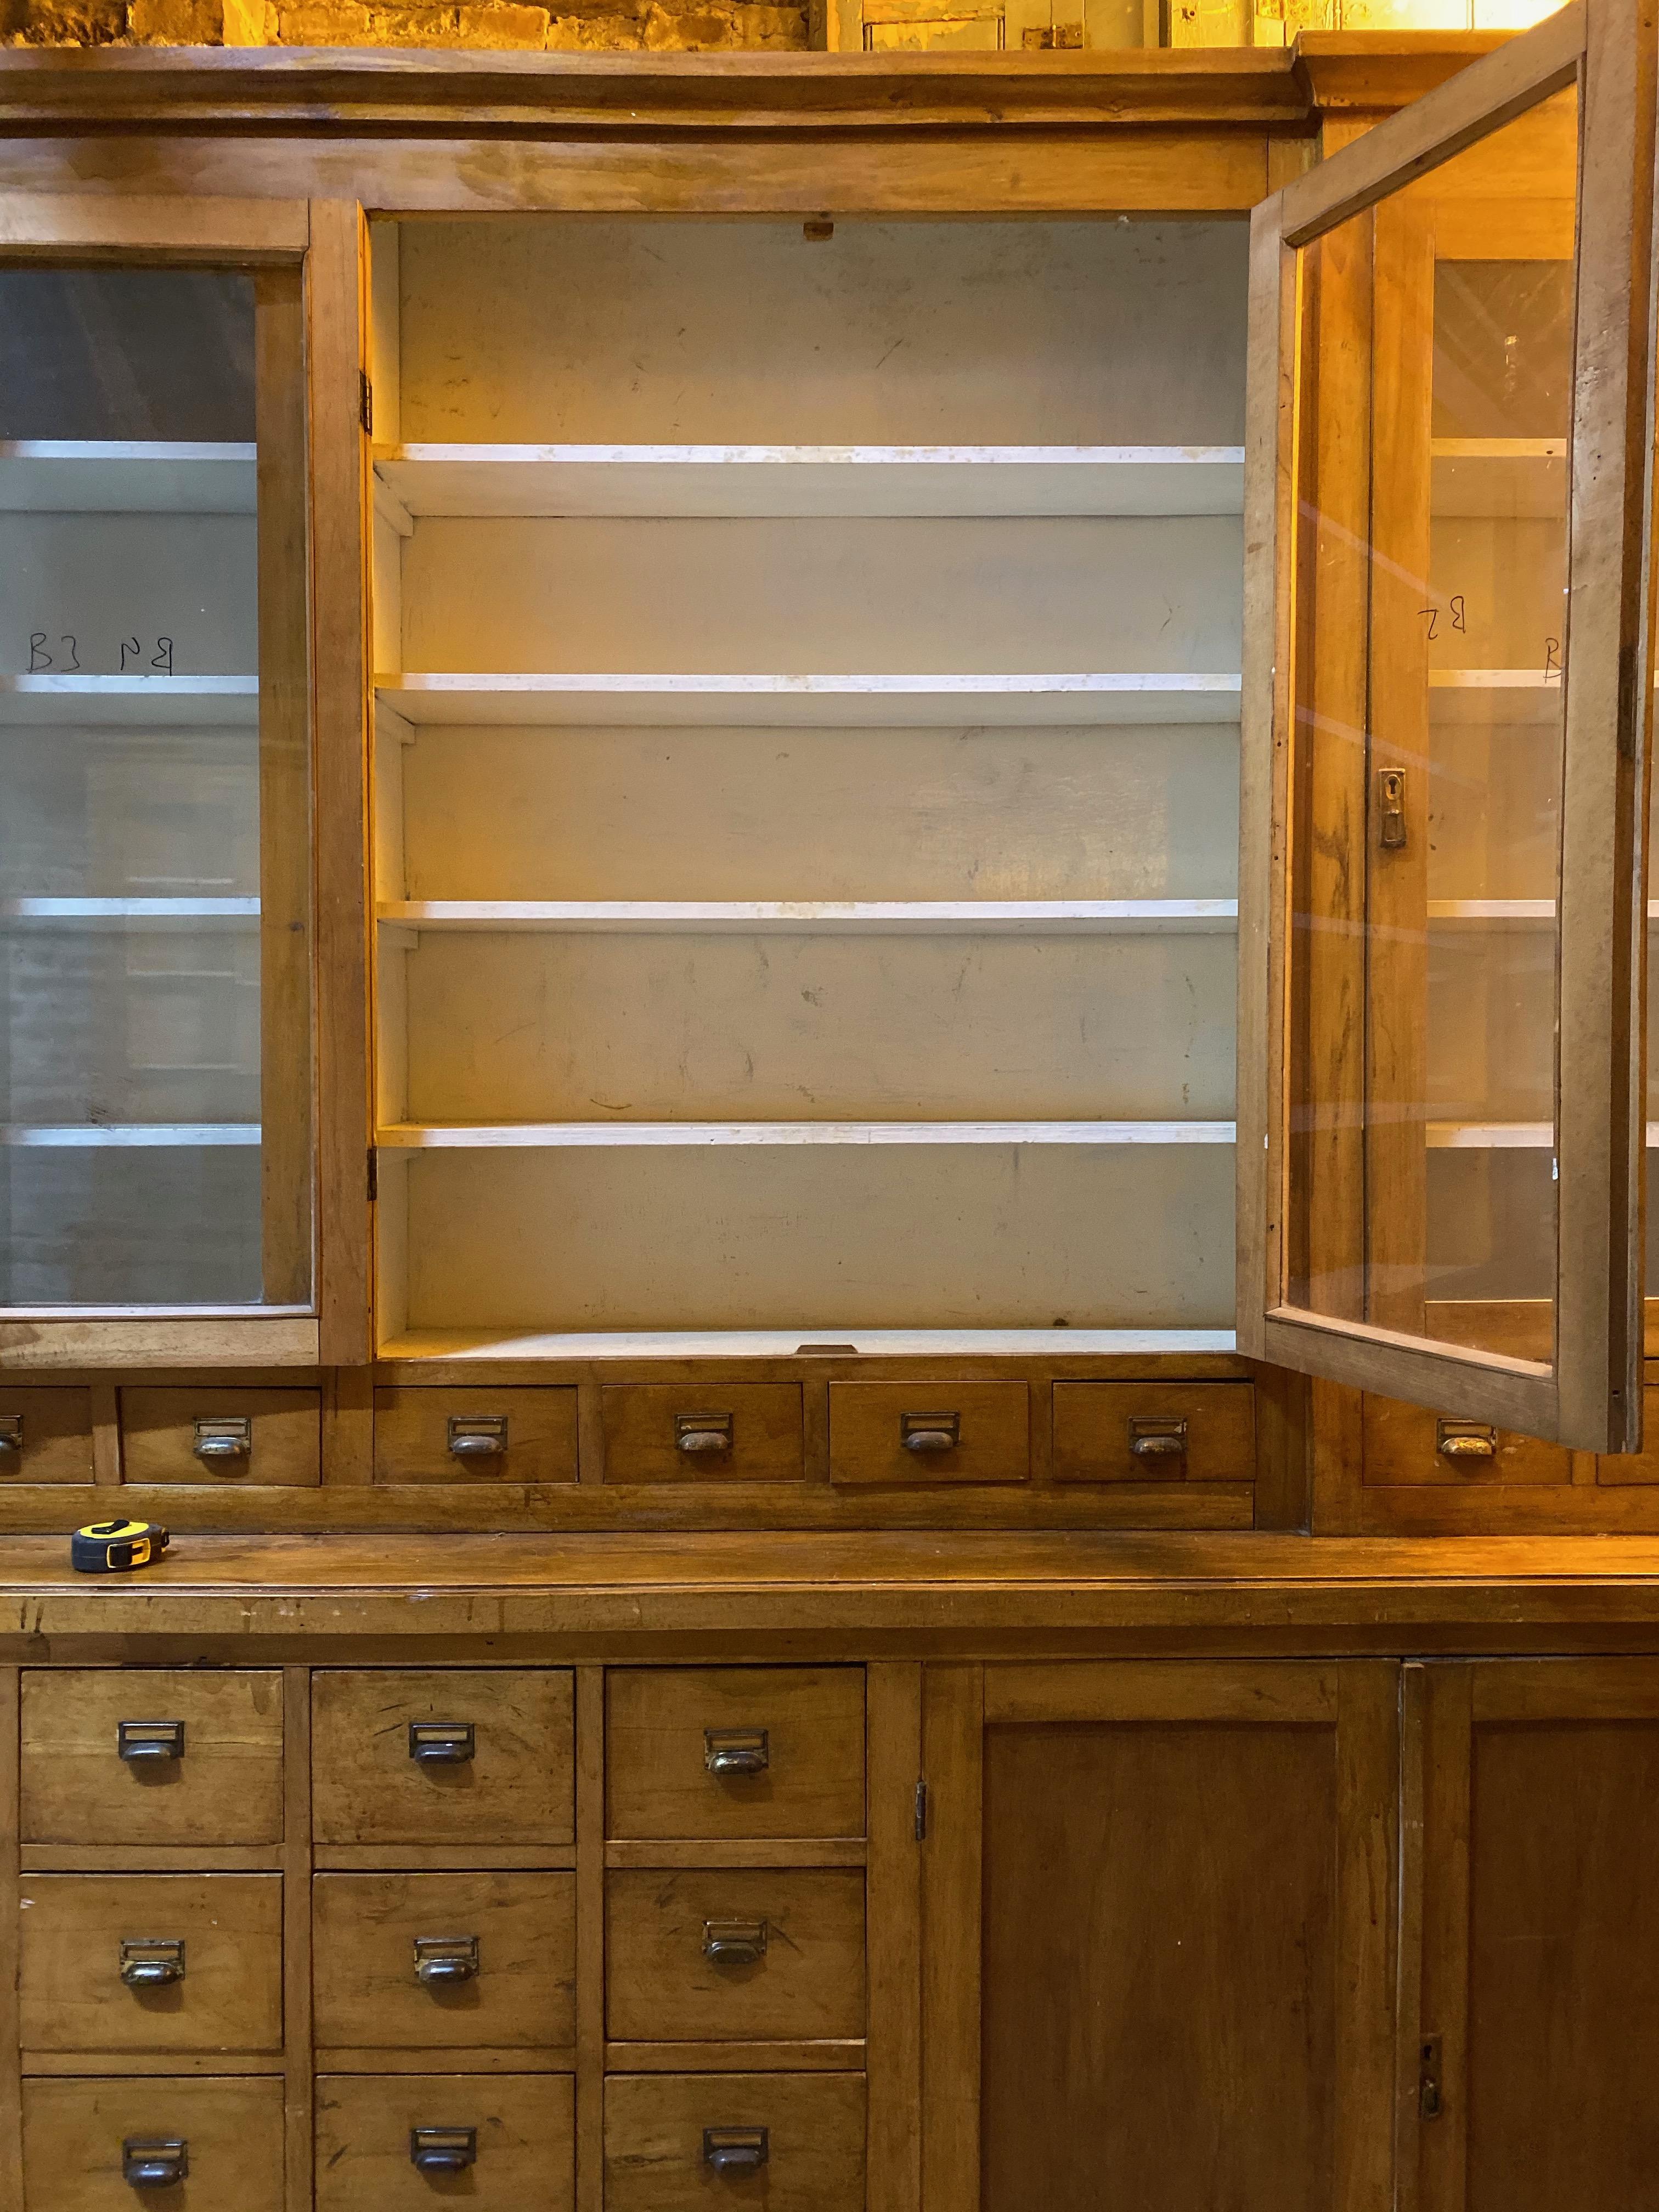 Early 20th Century Large Apothecary Display Cabinet Pharmacy Chemist Shop circa 1920s Number 3